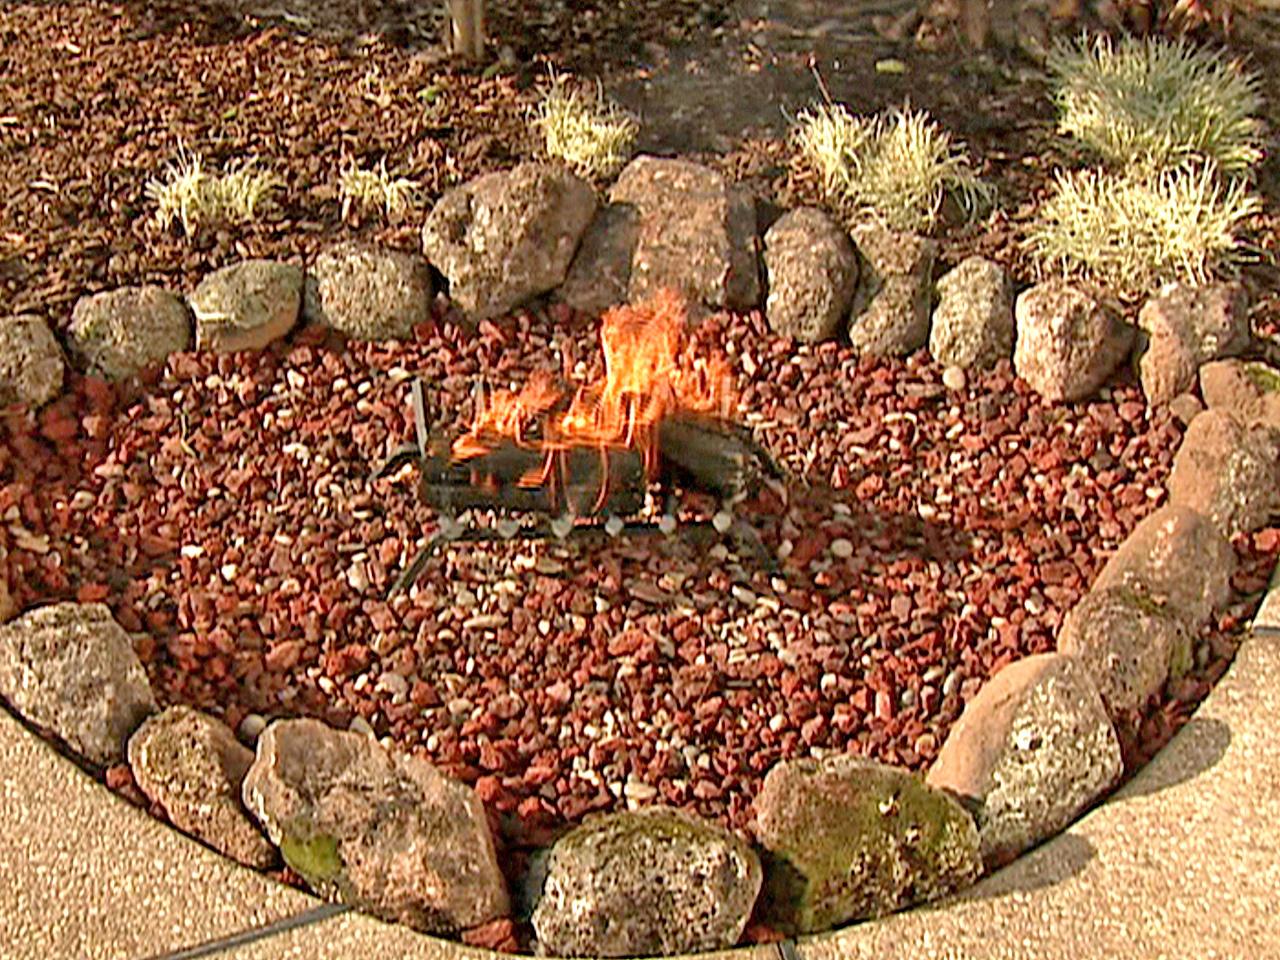 Outdoor Fire Pits And Pit Safety, What Not To Burn In A Fire Pit